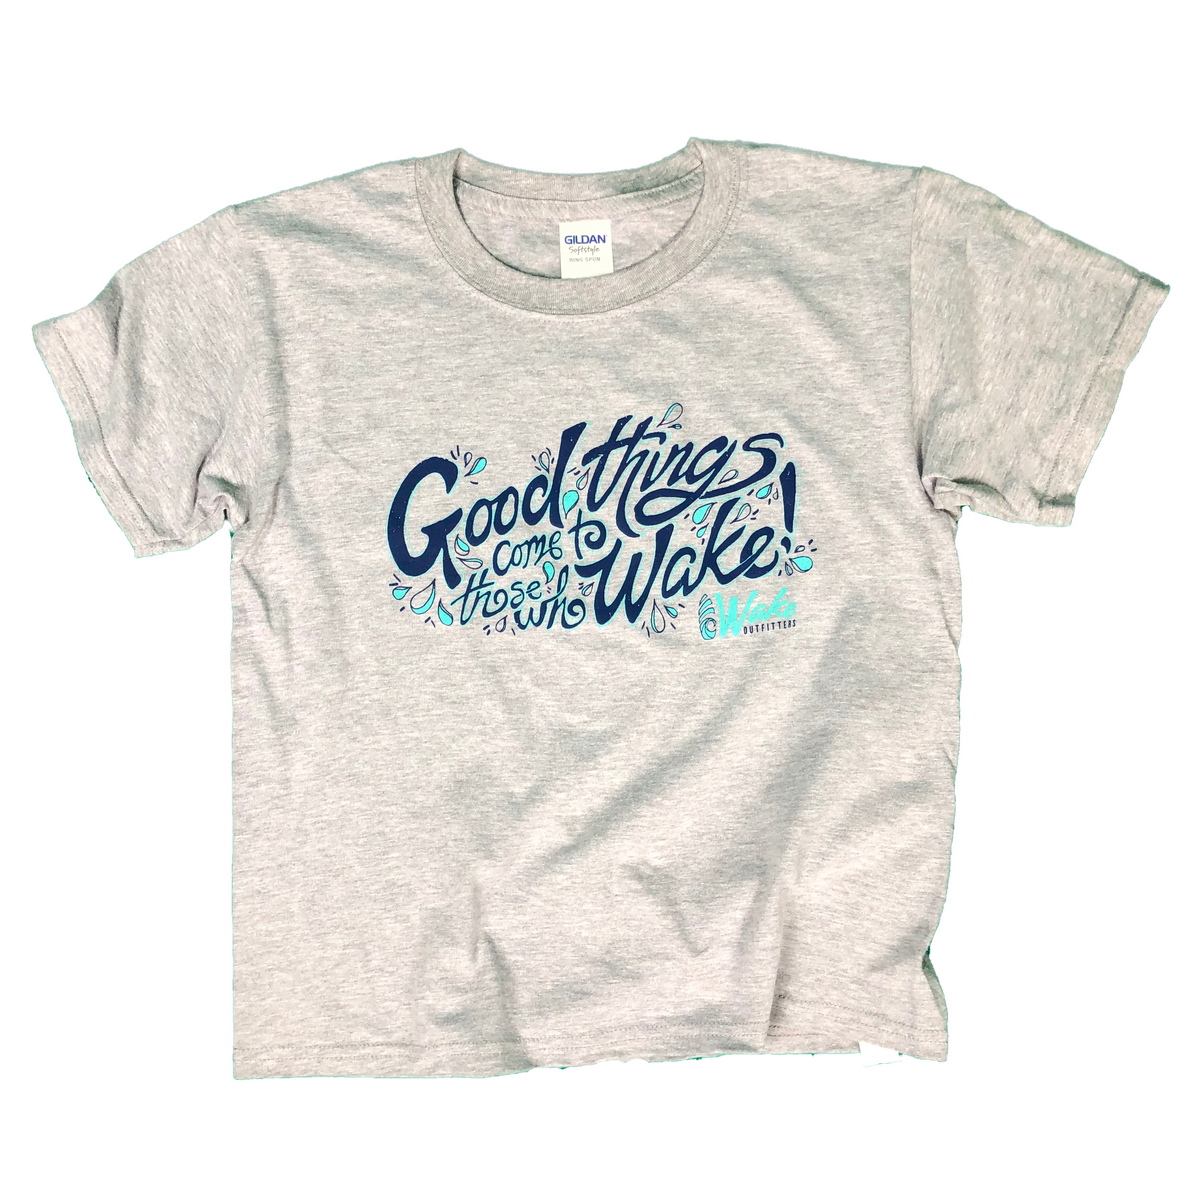 Good Things Come to Those Who Wake® - Youth Shirt